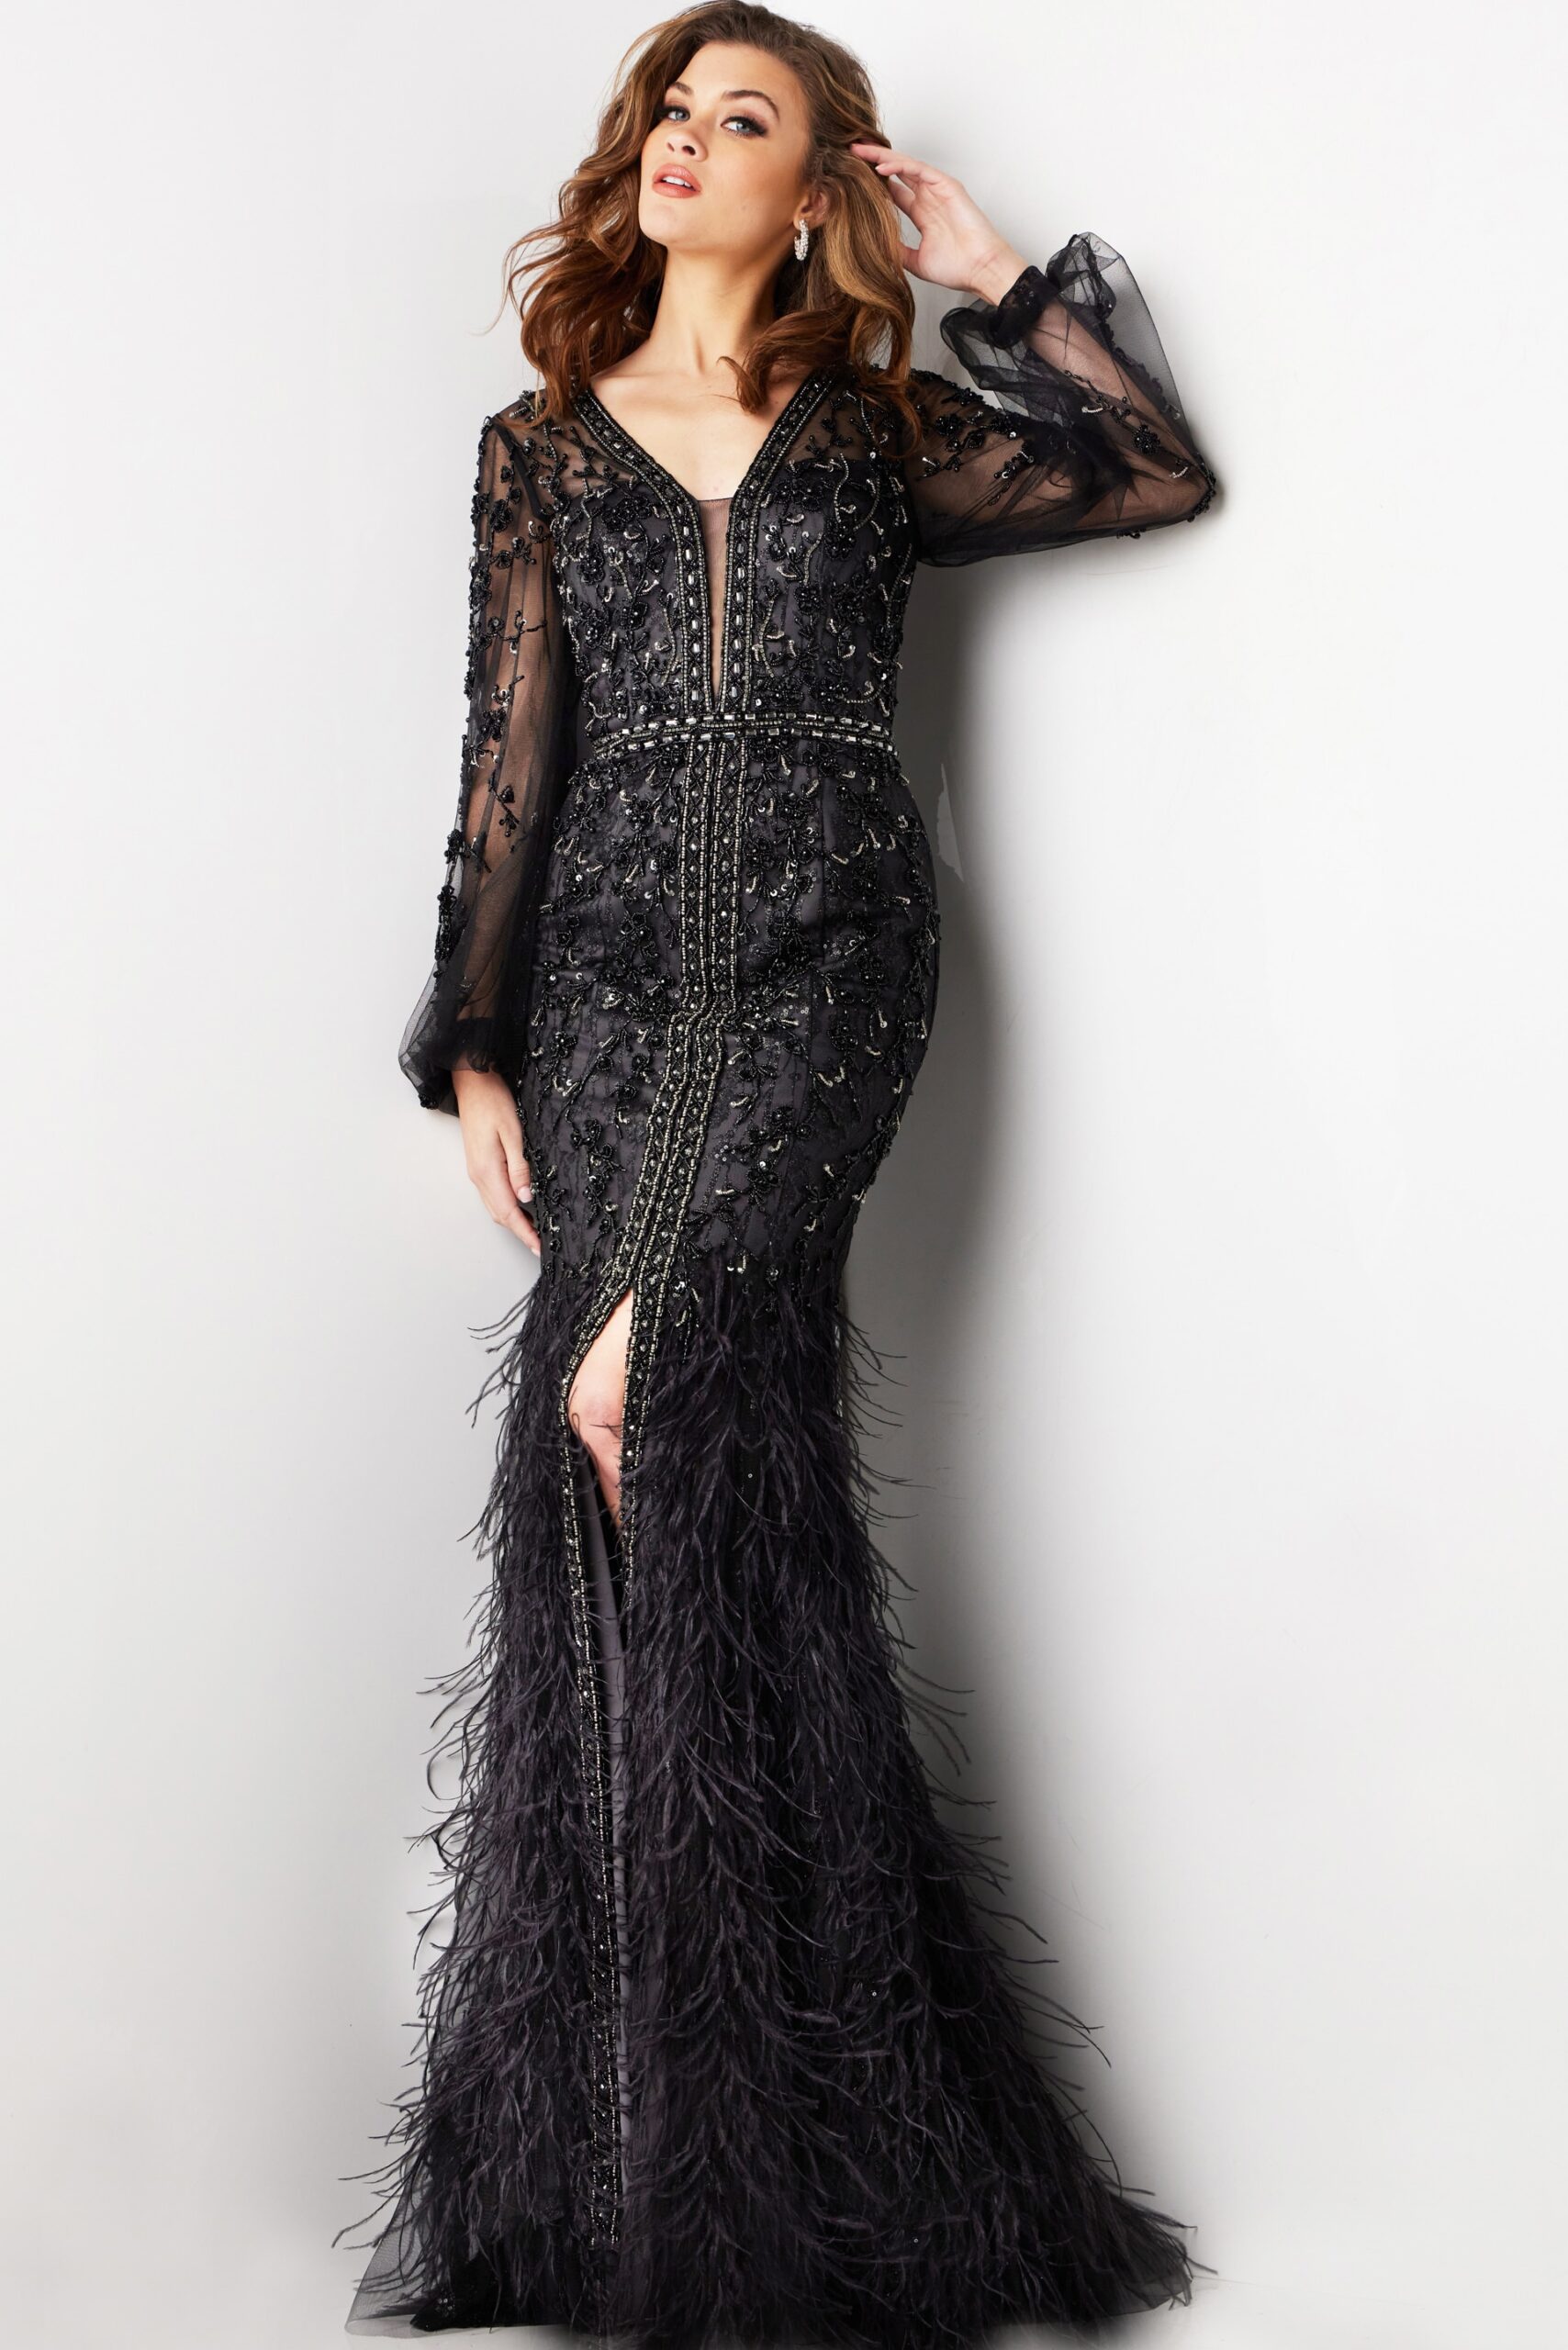 Black Feather Skirt Long Sleeve Gown 37558